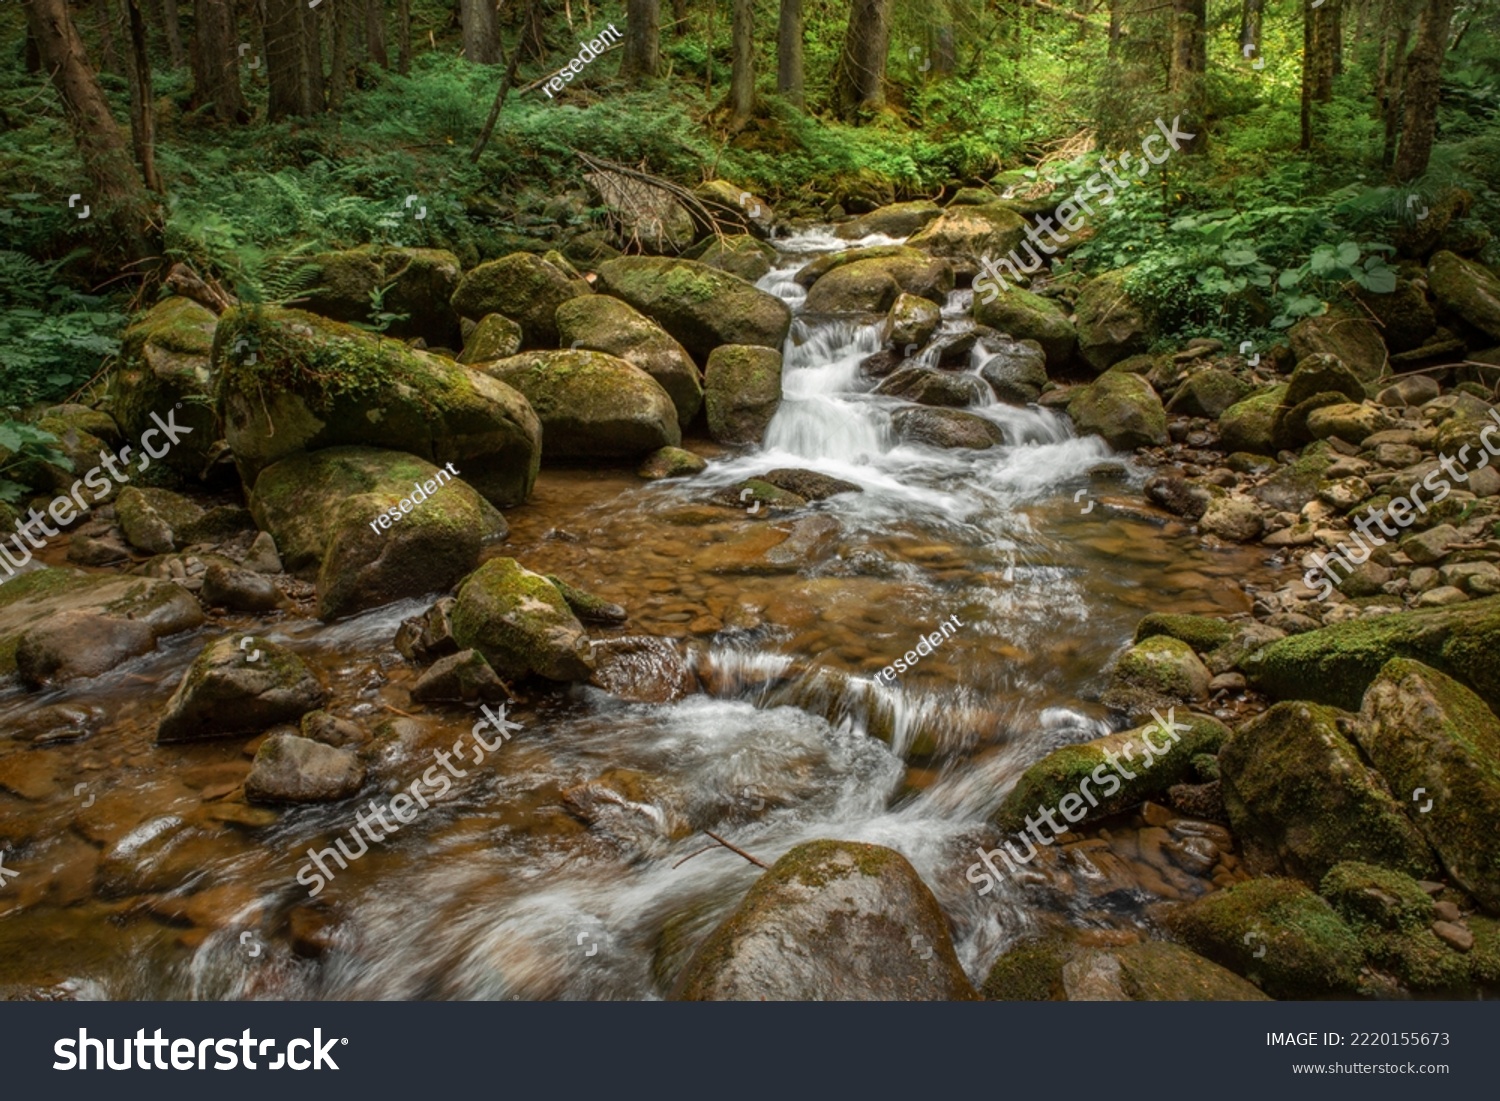 beautiful landscape with a small waterfall in a forest with stone terrain #2220155673